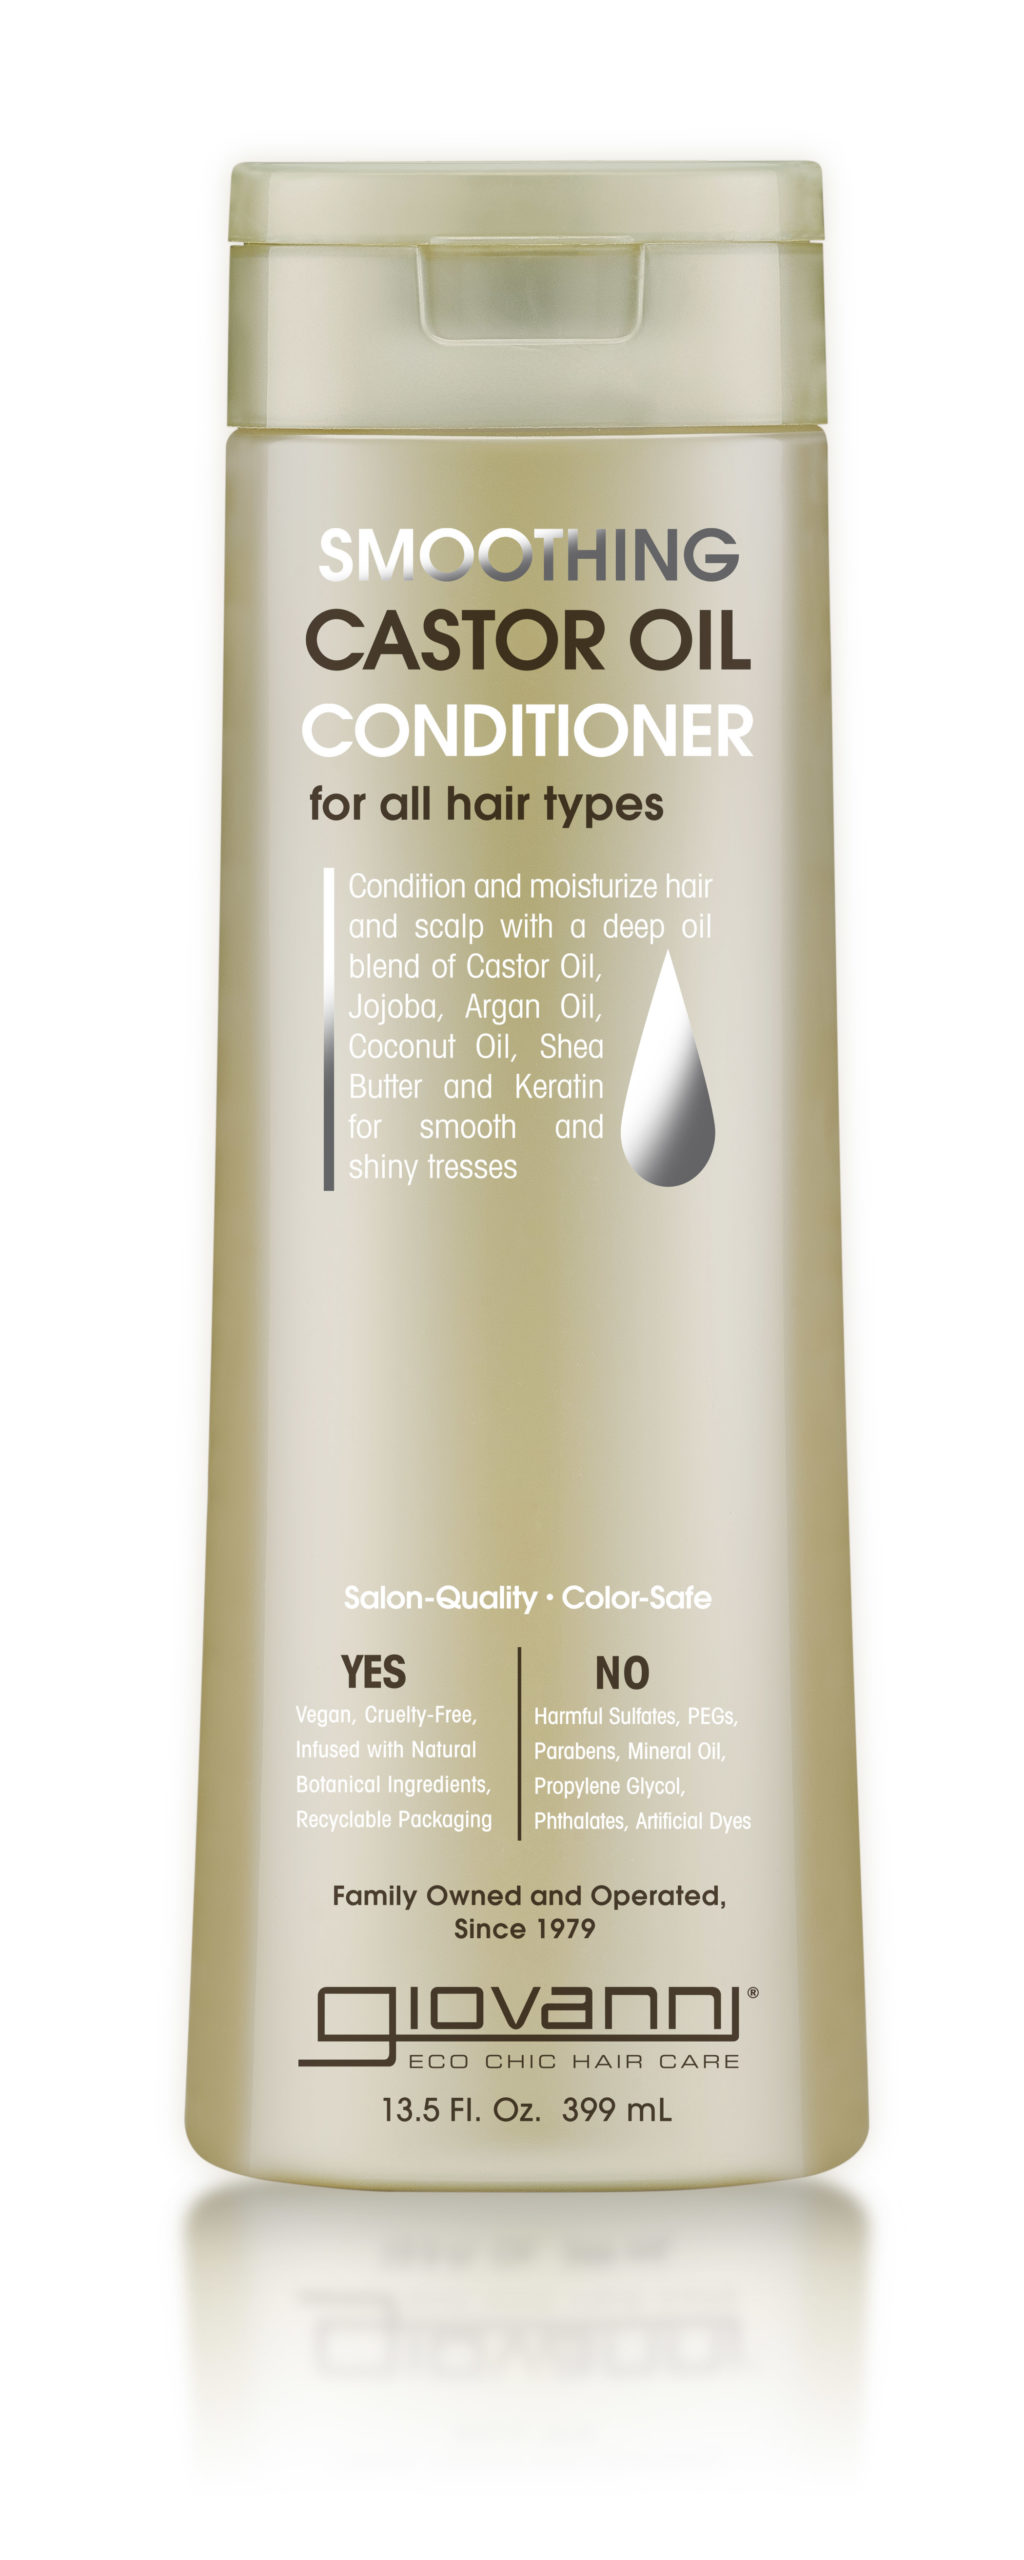 Smoothing Castor Oil Conditioner for Silky Hair | Giovanni